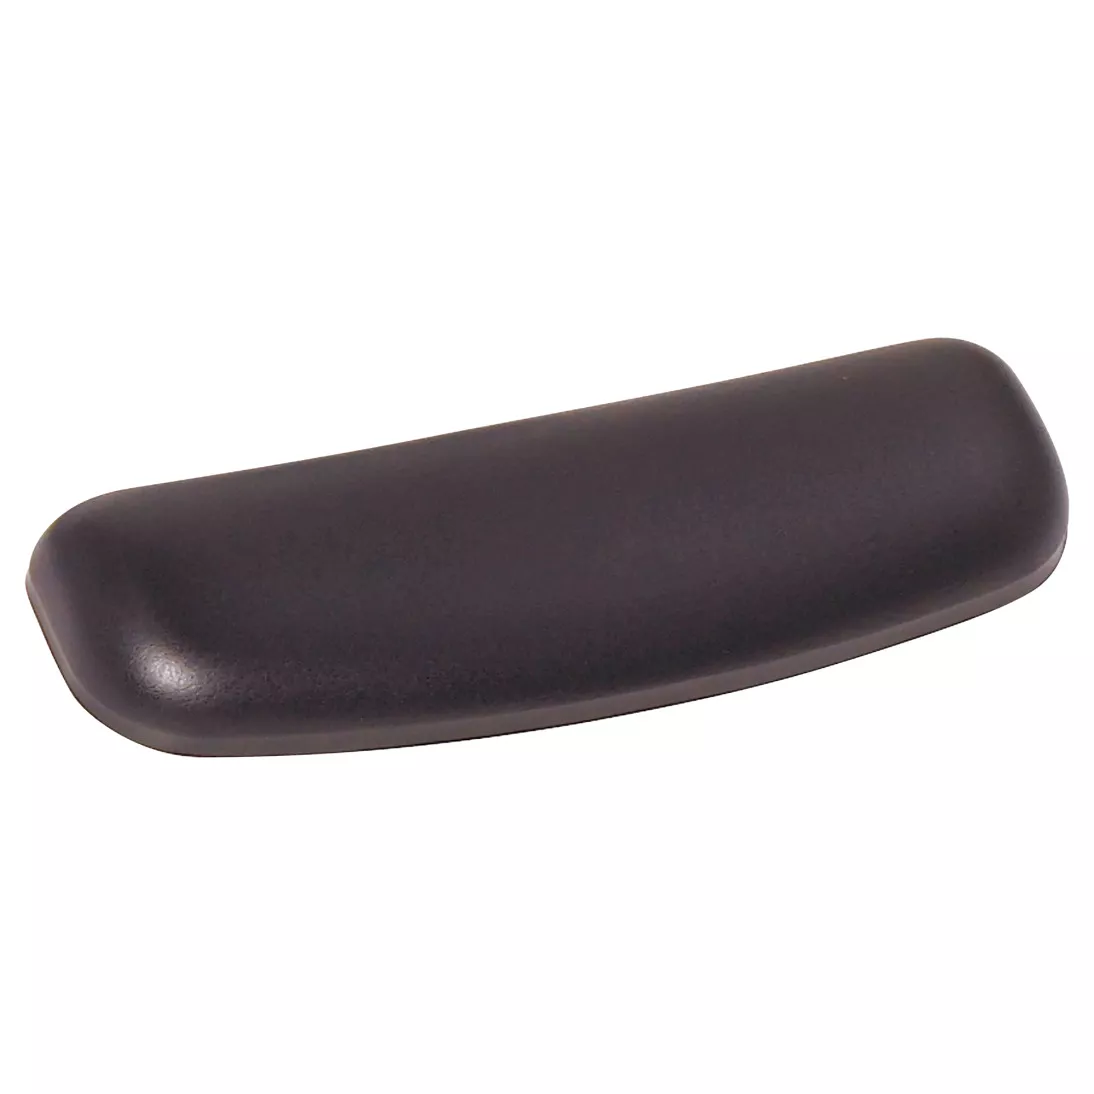 3M™ Gel Wrist Rest WR305LE, with Antimicrobial Product Protect, 25%
Recycled Content, Leatherette, Blk, 2.3 in x 6.9 in x 0.75 in